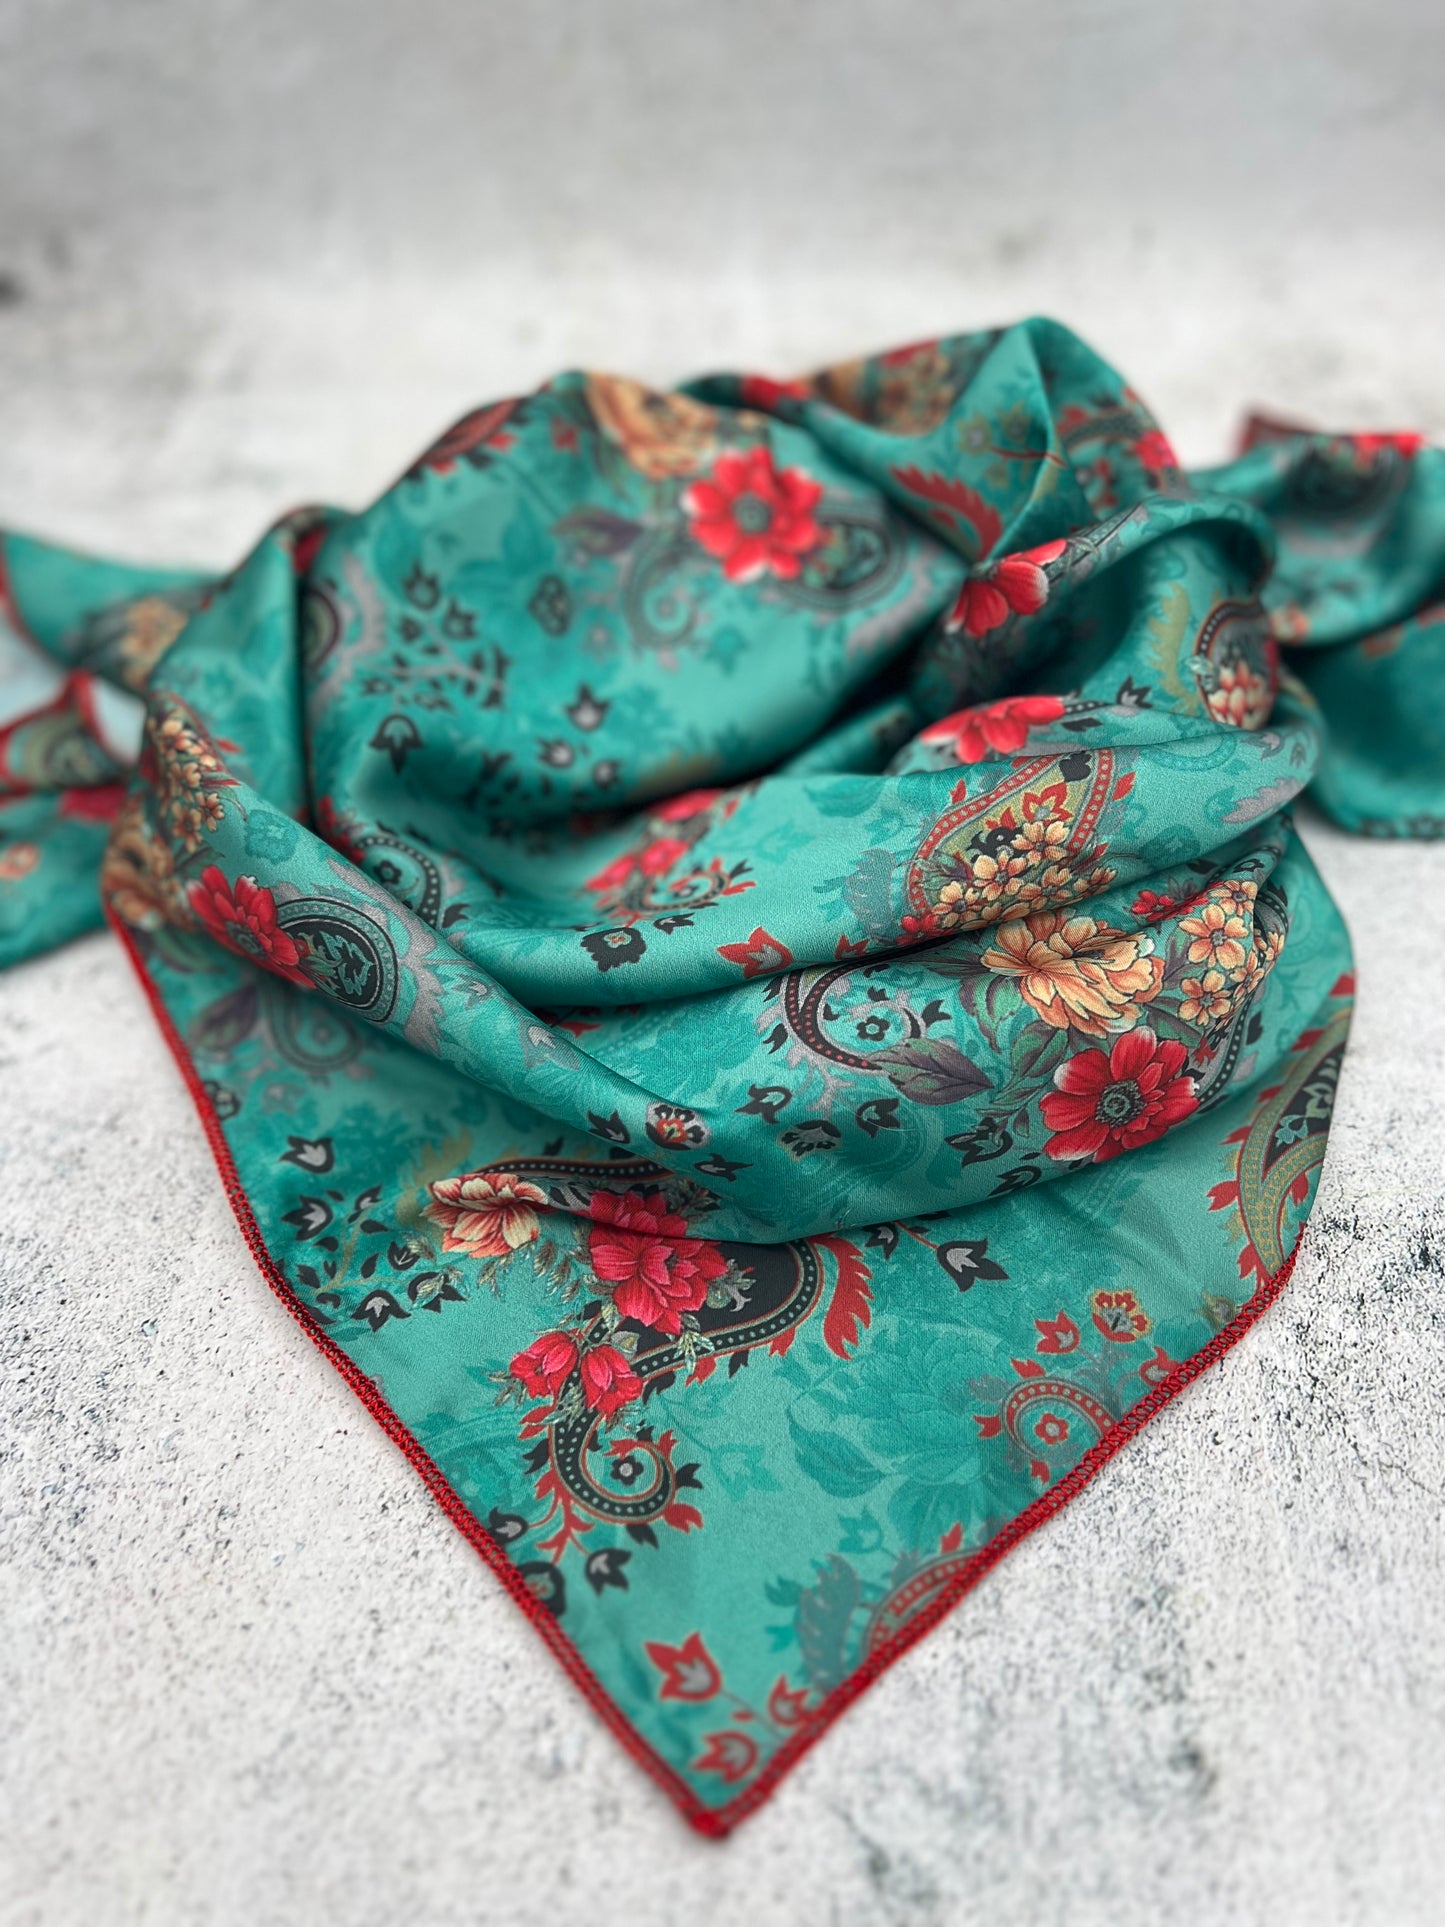 Teal & Coral Paisley - The Thrifty Cowgirl, Co.